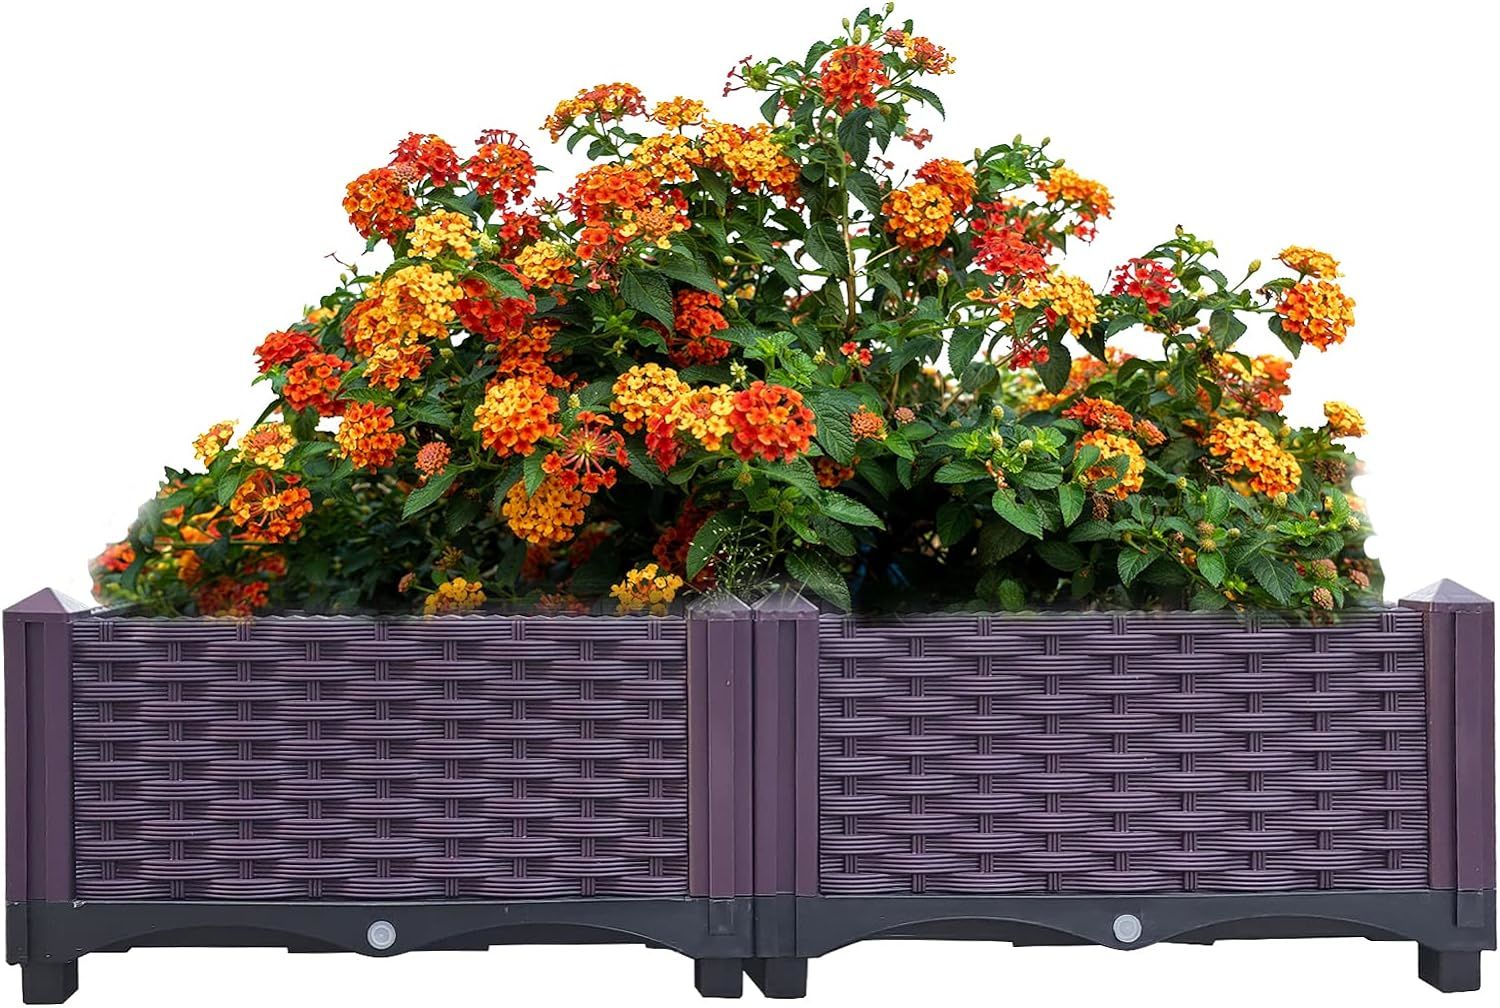 Planter Boxes Raised Garden Bed,2 Pieces Plastic Raised Garden Bed Garden Planter Boxes for Indoor & Outdoor Vegetable Fruit Flower Herb Growing Box